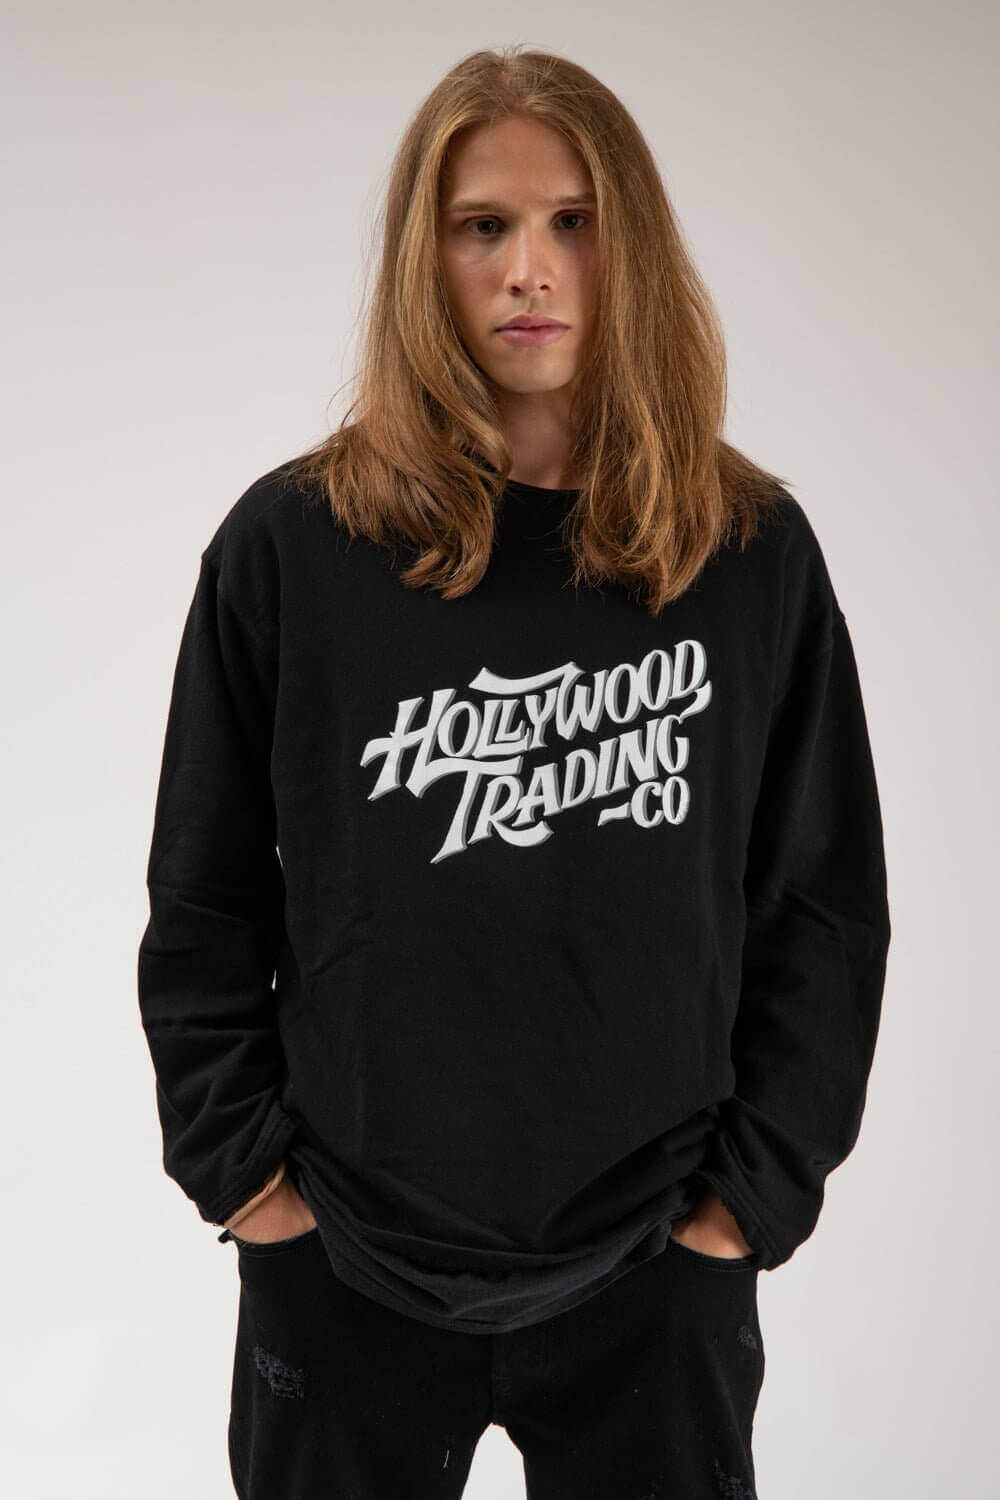 HOLLYWOOD T.C. HOODIE Regular fit hoodie. Hood with drawstring, ribbed cuffs and hem. One front kangaroo pocket. Composition: 100% Cotton HTC LOS ANGELES